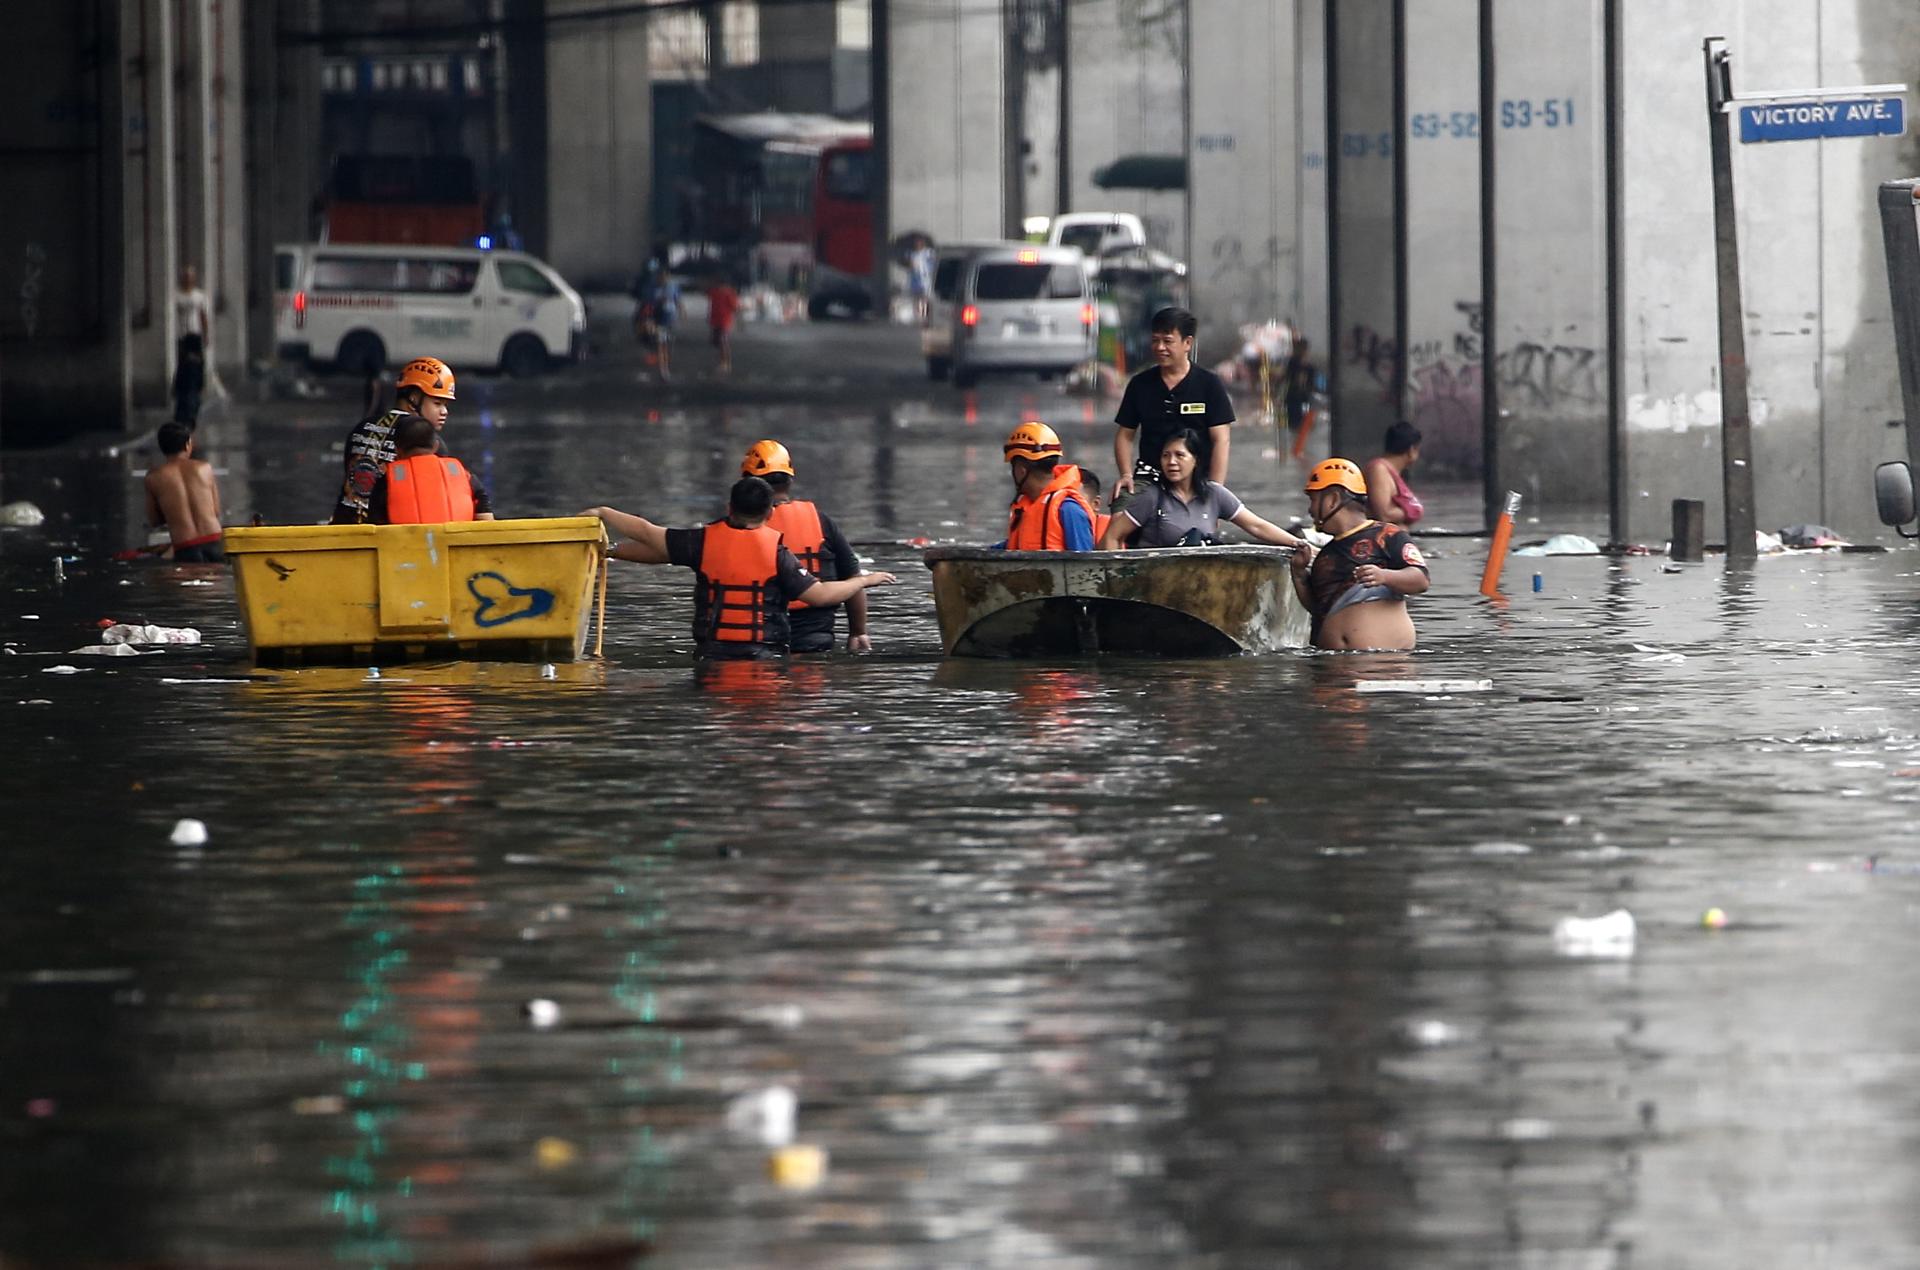 Emergency response teams use rafts to help transport residents along a flooded road in Quezon City, Metro Manila, Philippines, 31 August 2023. EFE/EPA/ROLEX DELA PENA